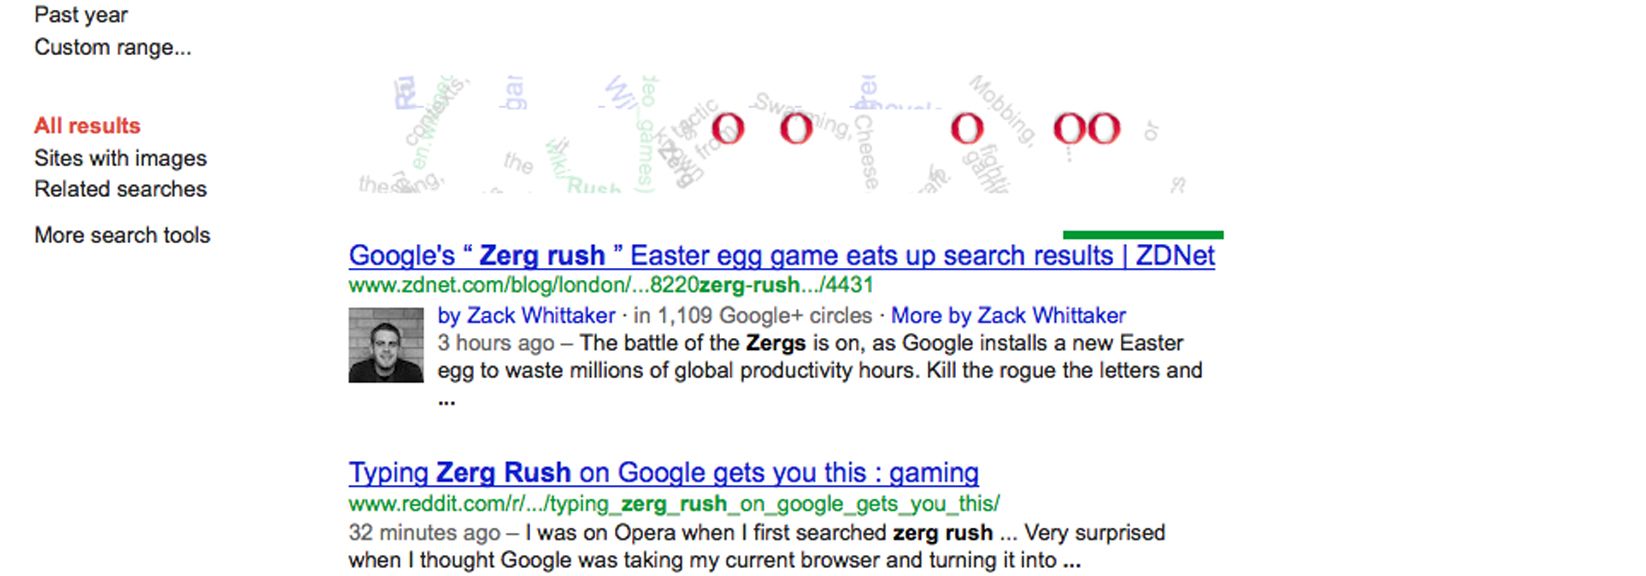 Zerg Rush' easter egg eats your Google search results